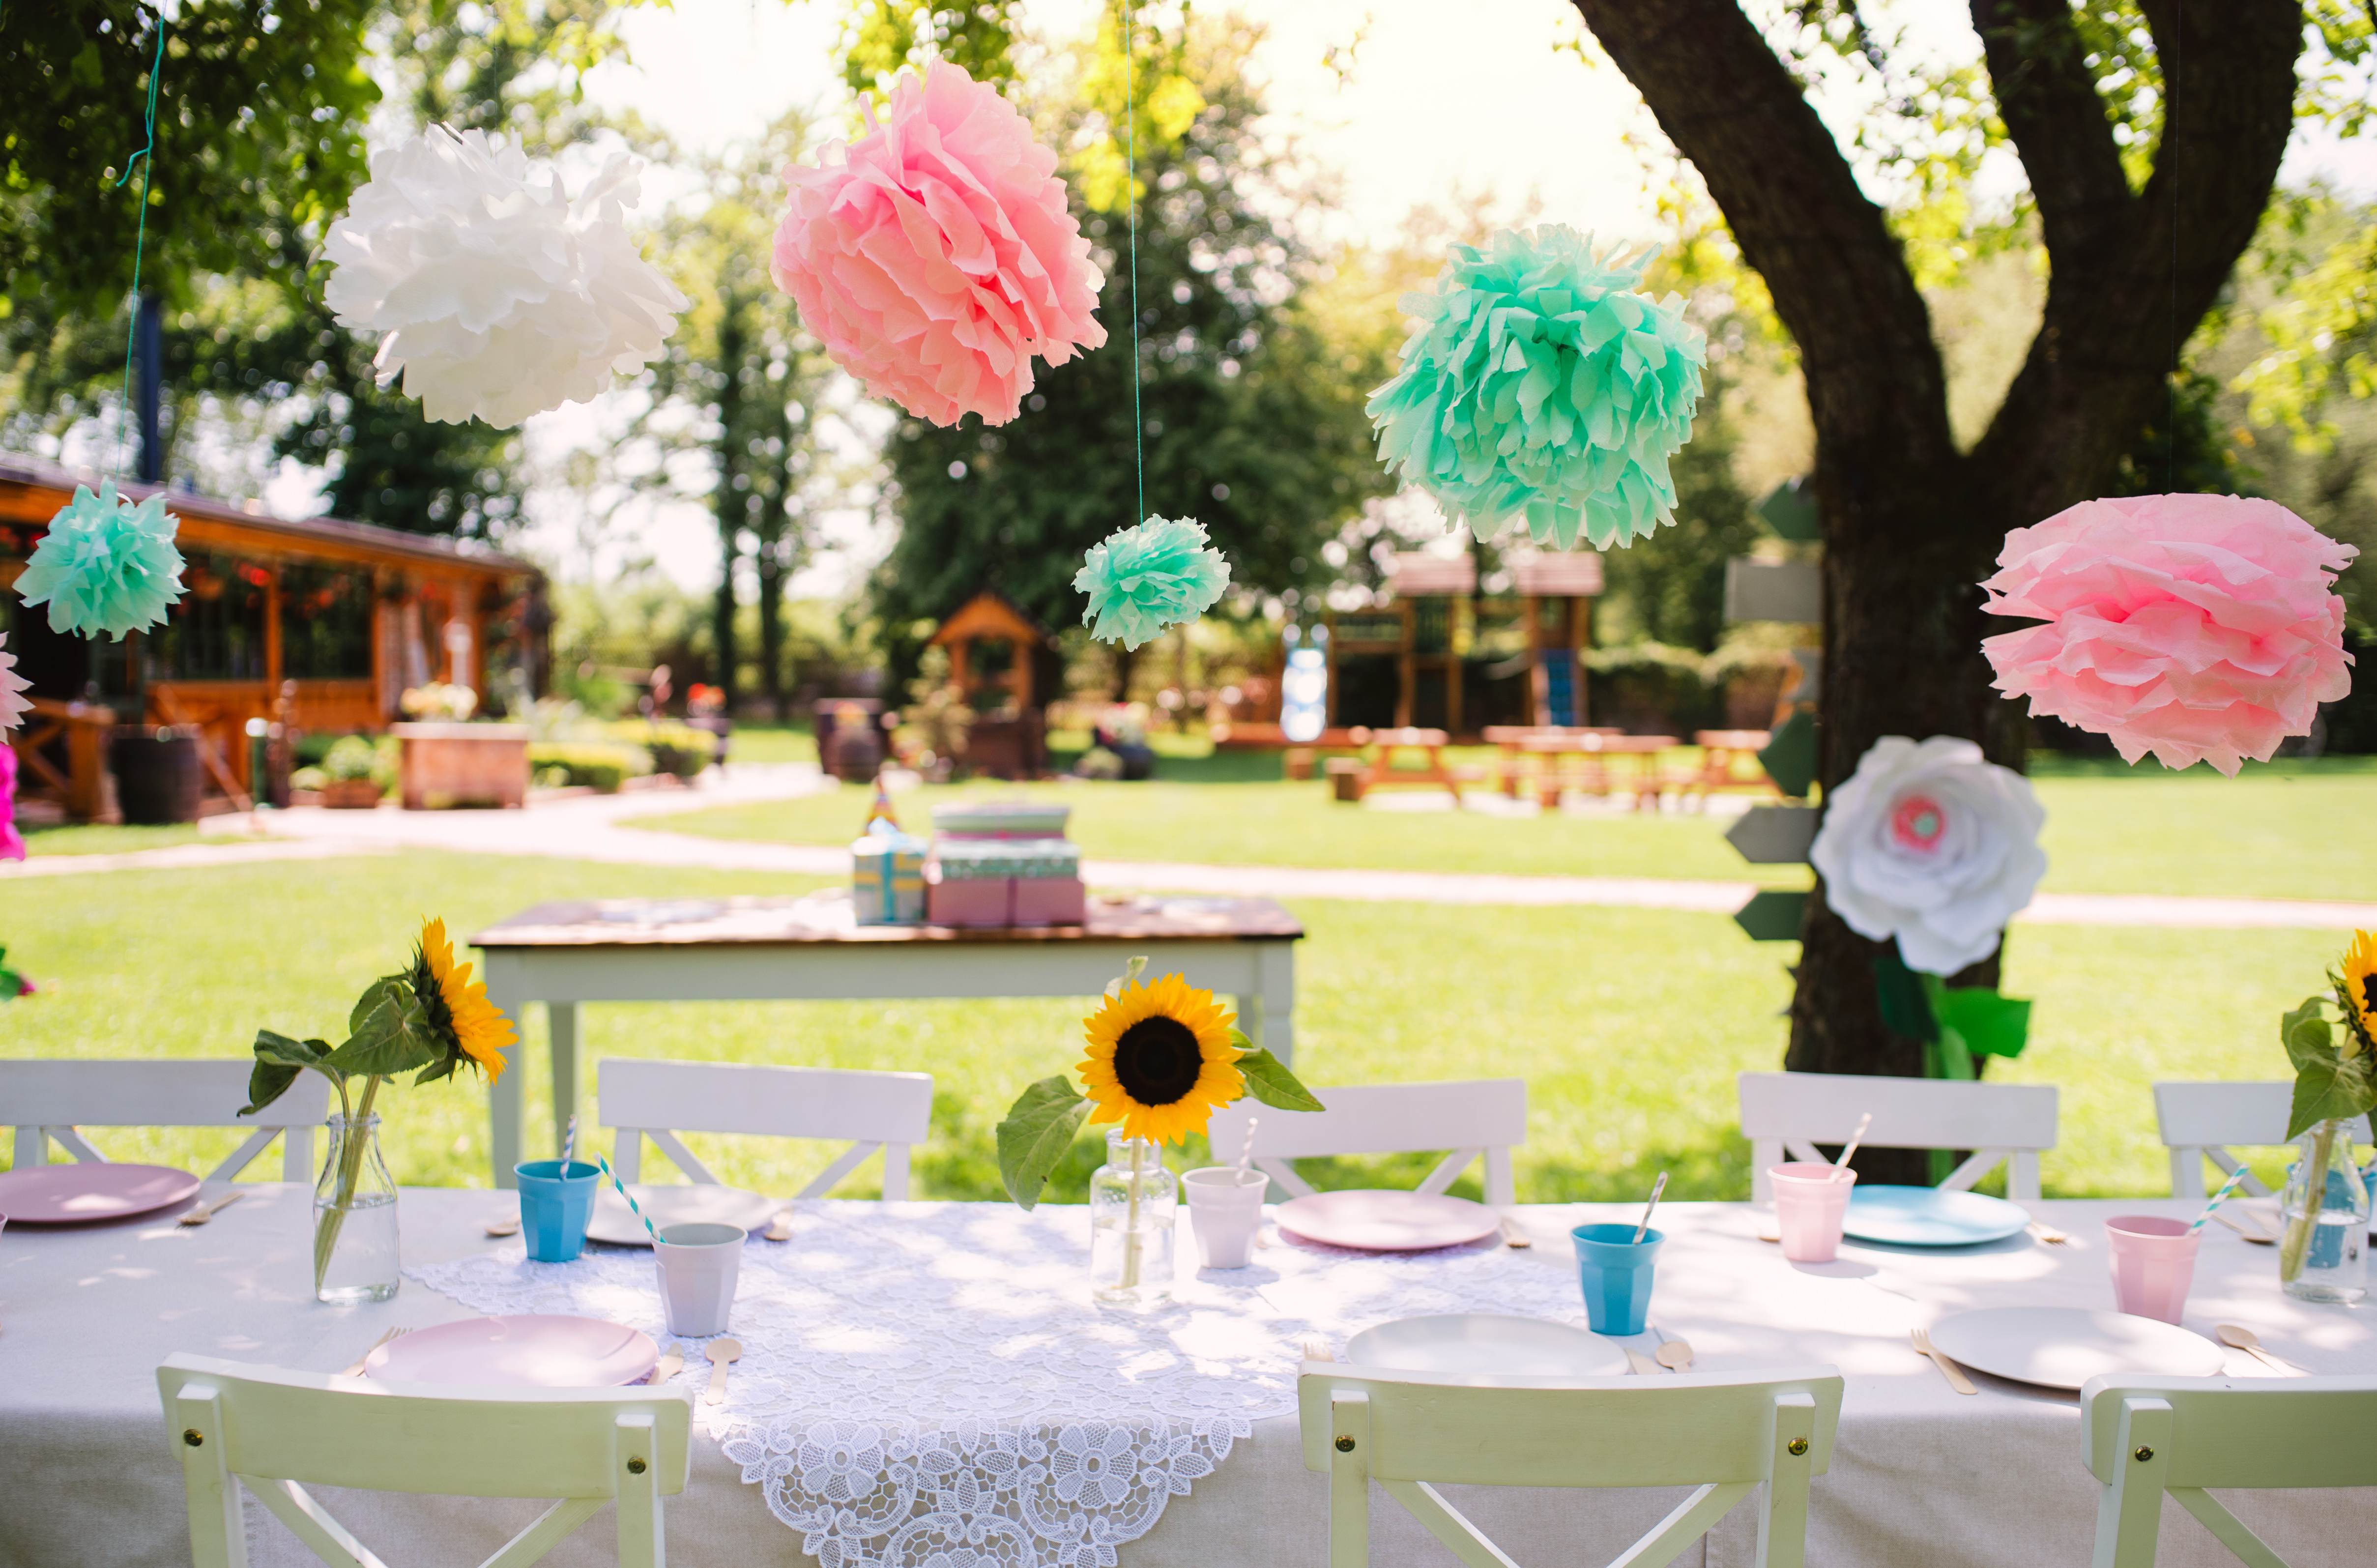 Baby shower decorations in the backyard to celebrate a new mom